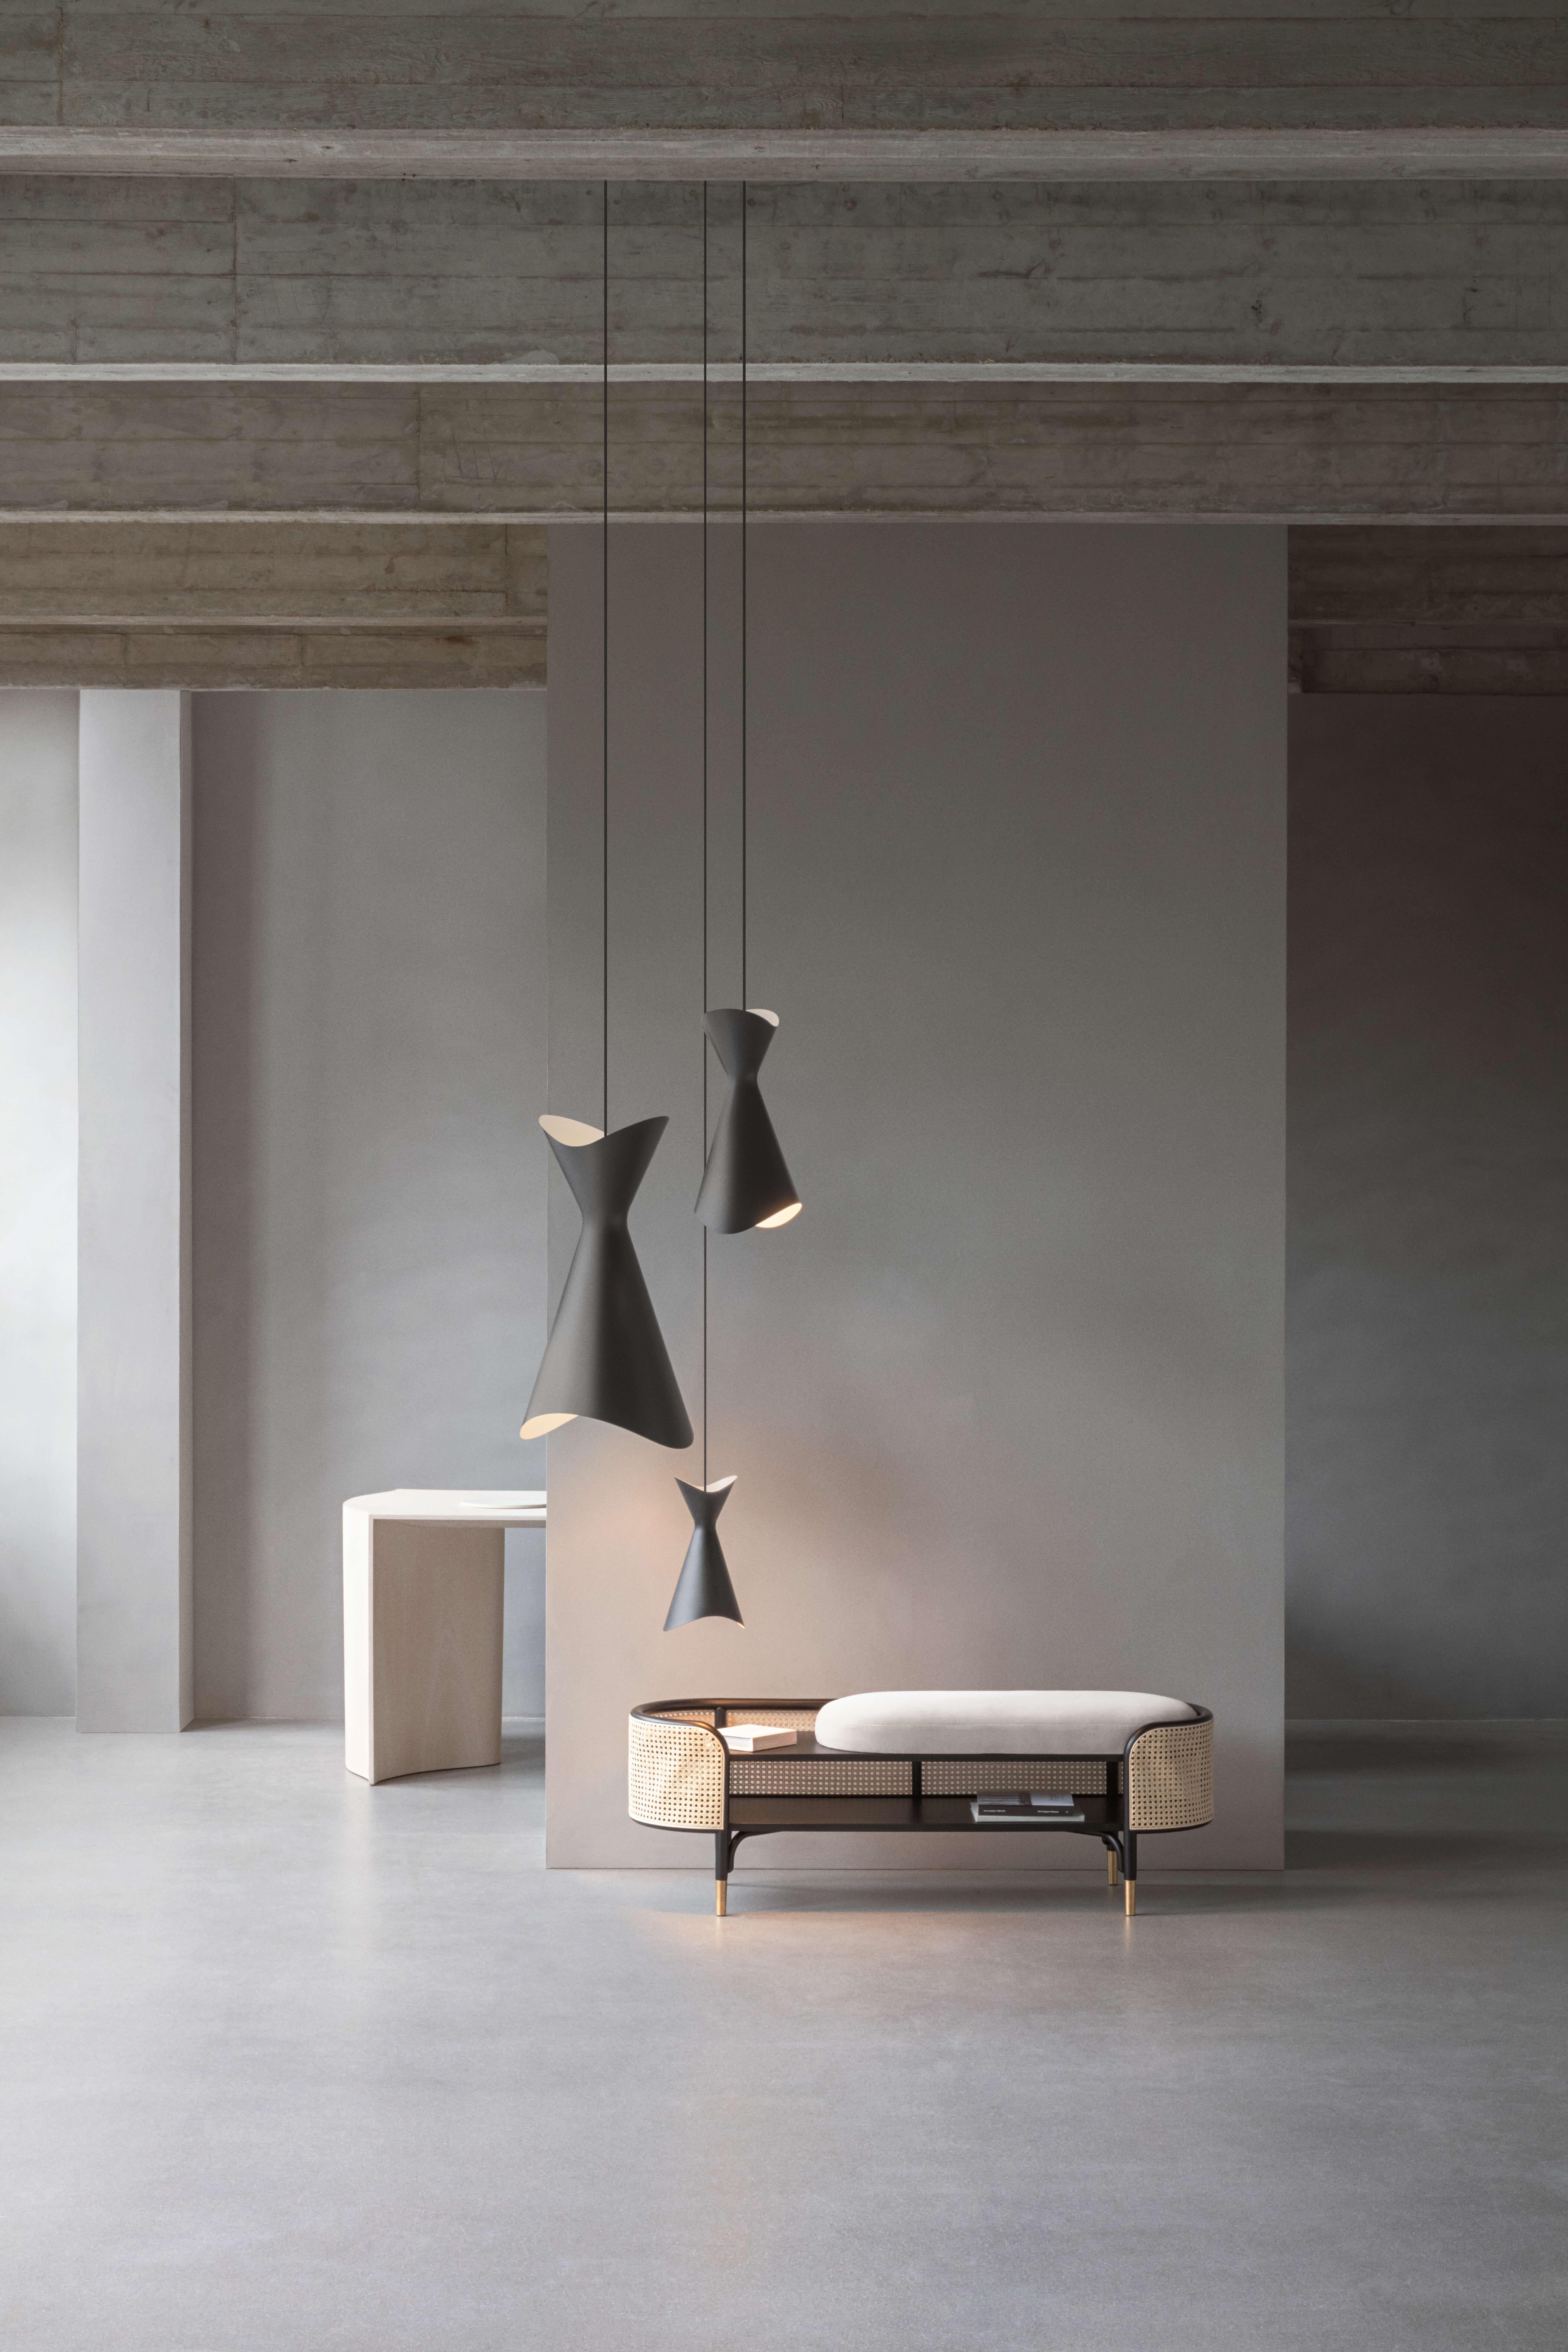 Ninotchka, 3 black pendant lamps by Bent Karlby
Editor: LYFA

Size : 
Big: H 76,4 x W 42,5 x D 37 cm
Medium: H 35 x W 19,5 x D 17 cm
Small: H 22,5 x W 12,5 x D 11 cm

Materials : Steel

3m textile cord black or white, depending lampshade